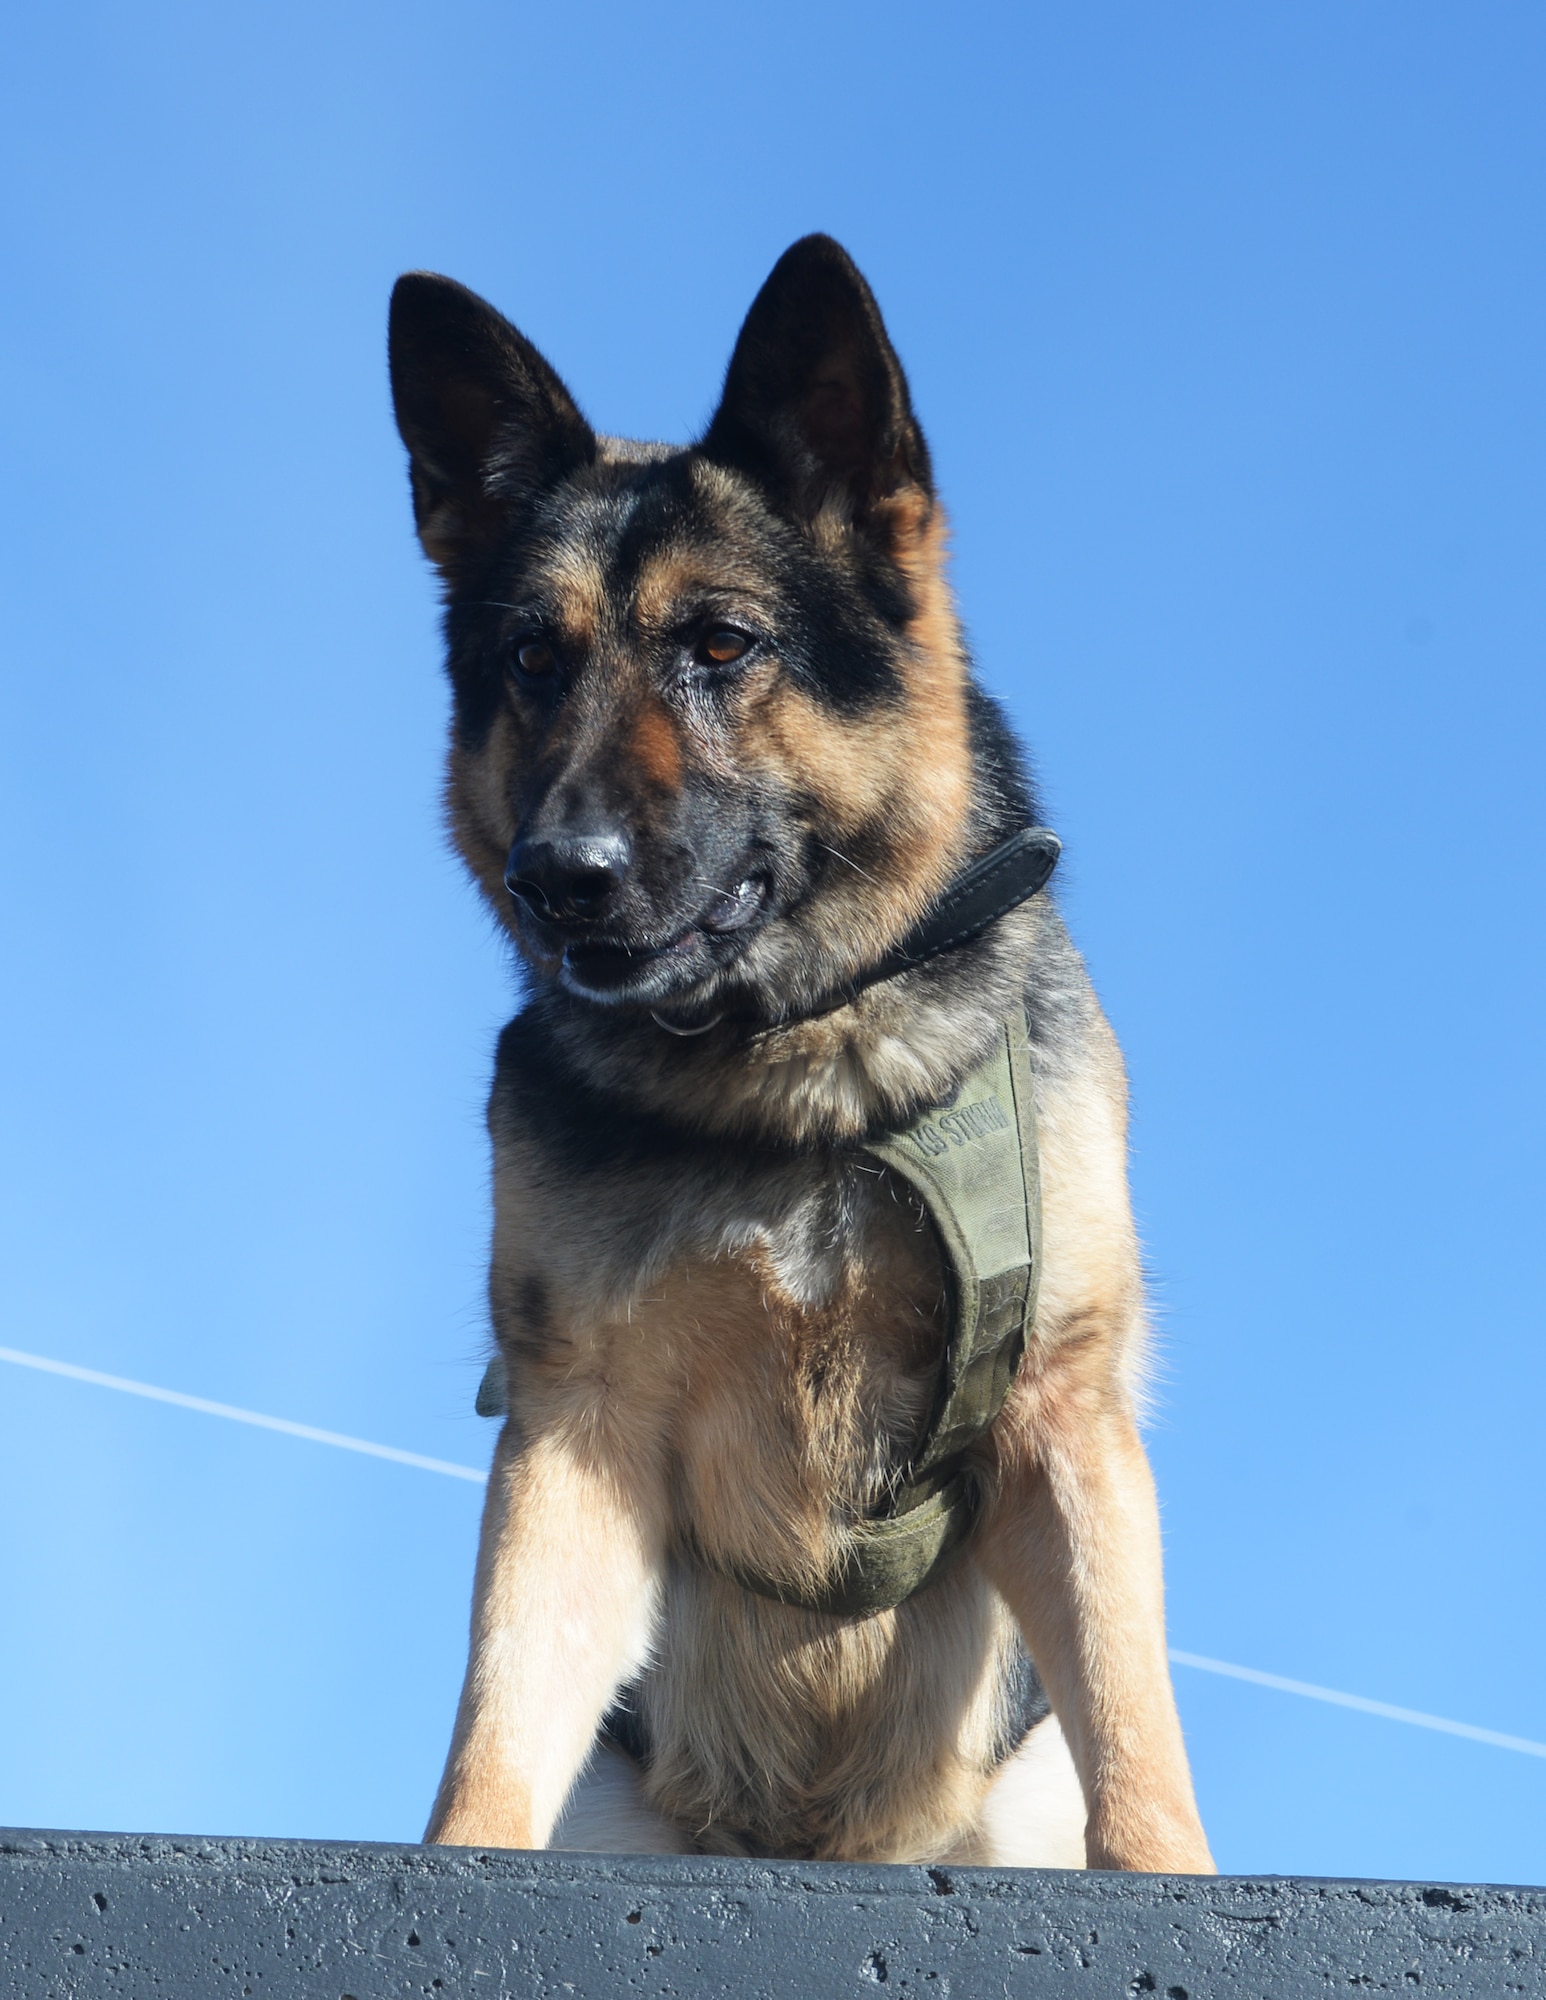 Mink, a Military Working Dog assigned to the 28th Security Forces Squadron, stands on top of an obstacle at Ellsworth Air Force Base, S.D., Oct. 31, 2017. The Veterinary Treatment Facility on base cares for MWDs such as Mink so they can remain able to carry out their part of the Air Force mission. (U.S. Air Force Photo by Airman 1st Class Thomas Karol)